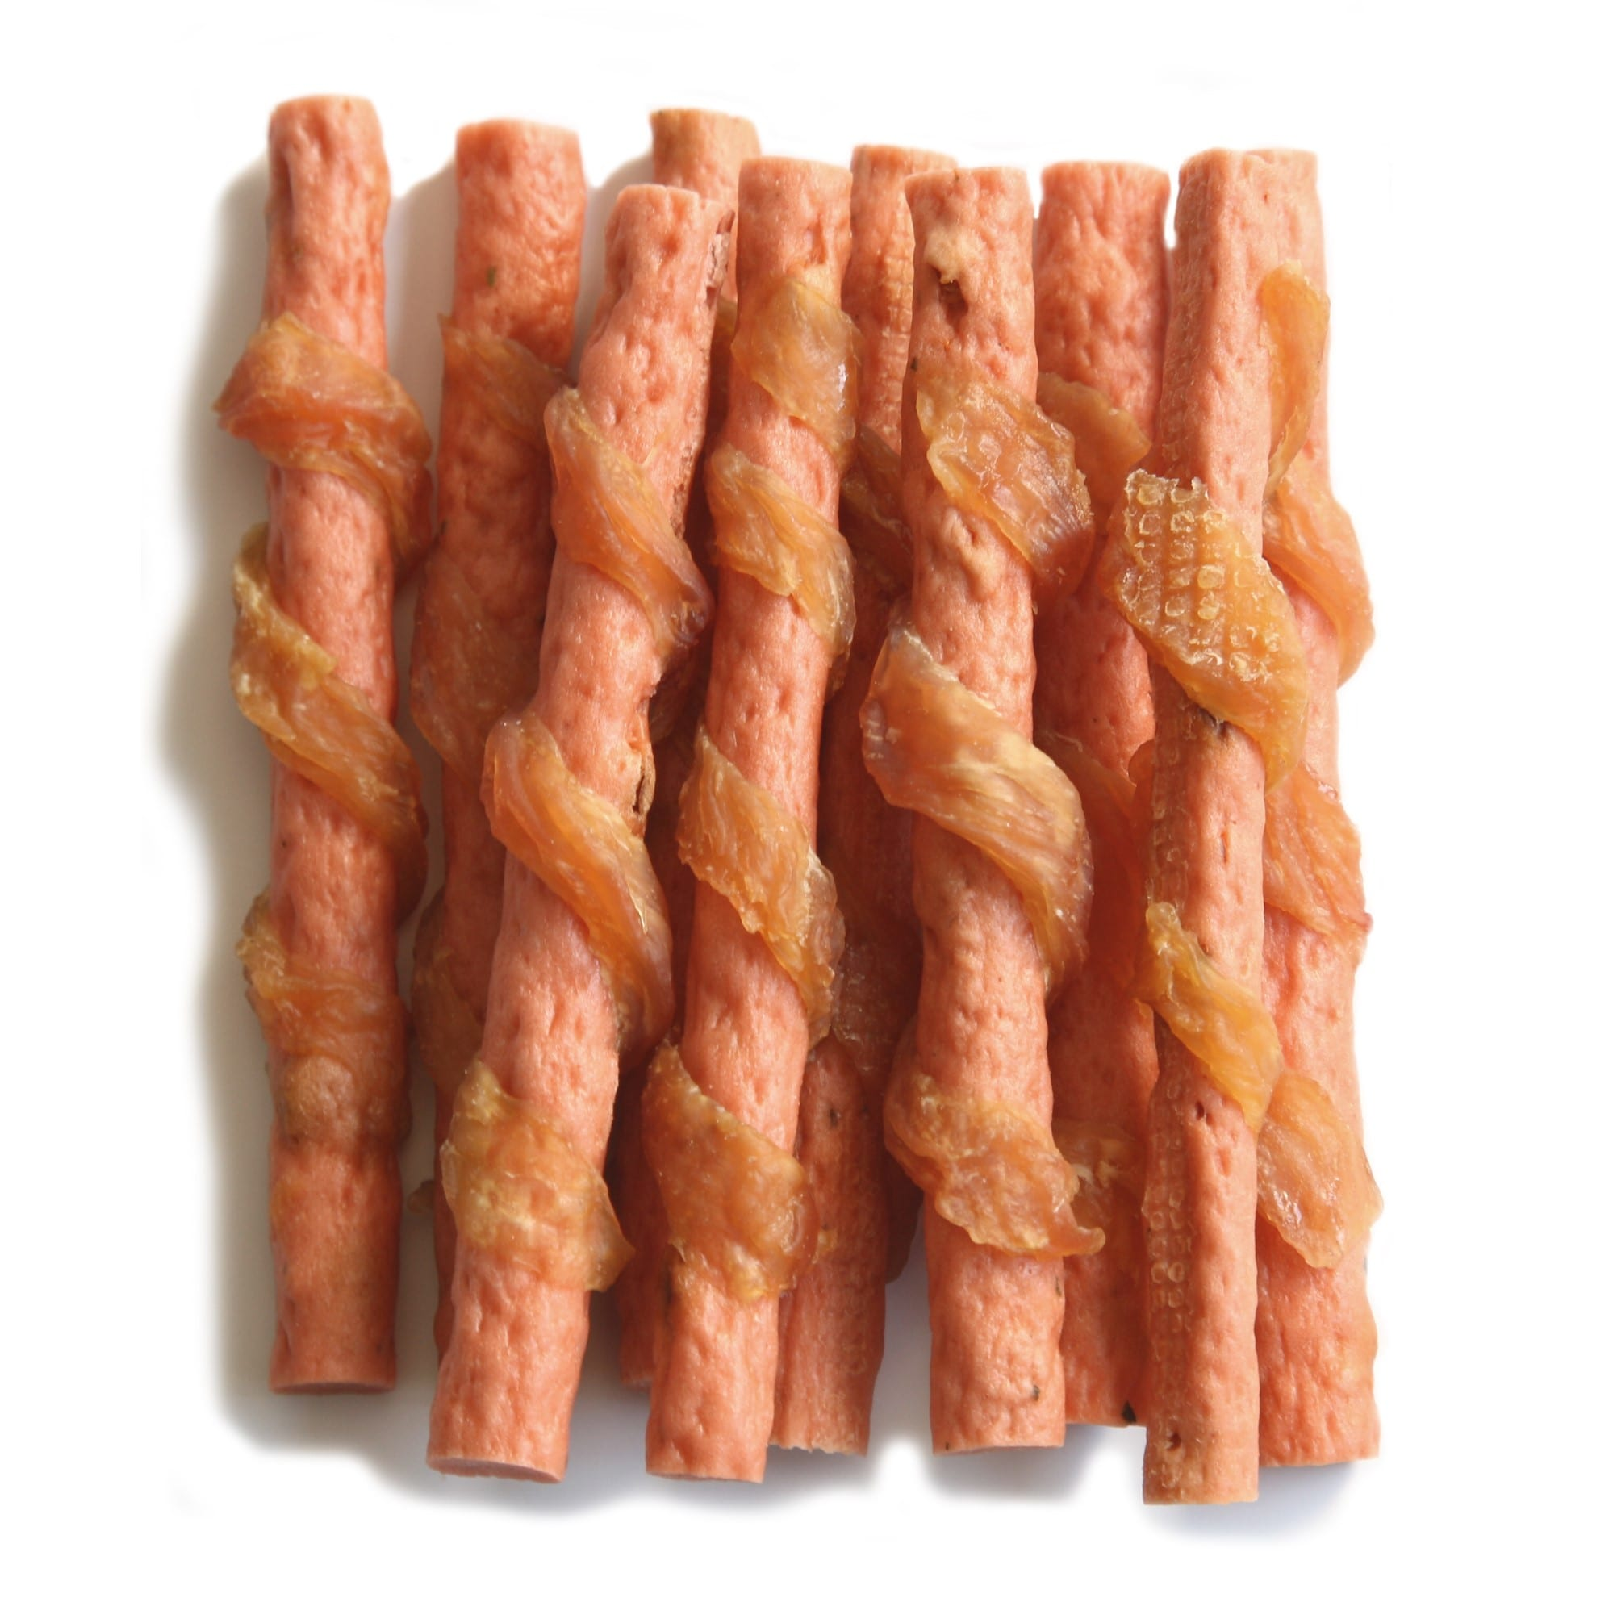 Pet Munchies Chicken With Carrot Sticks Product